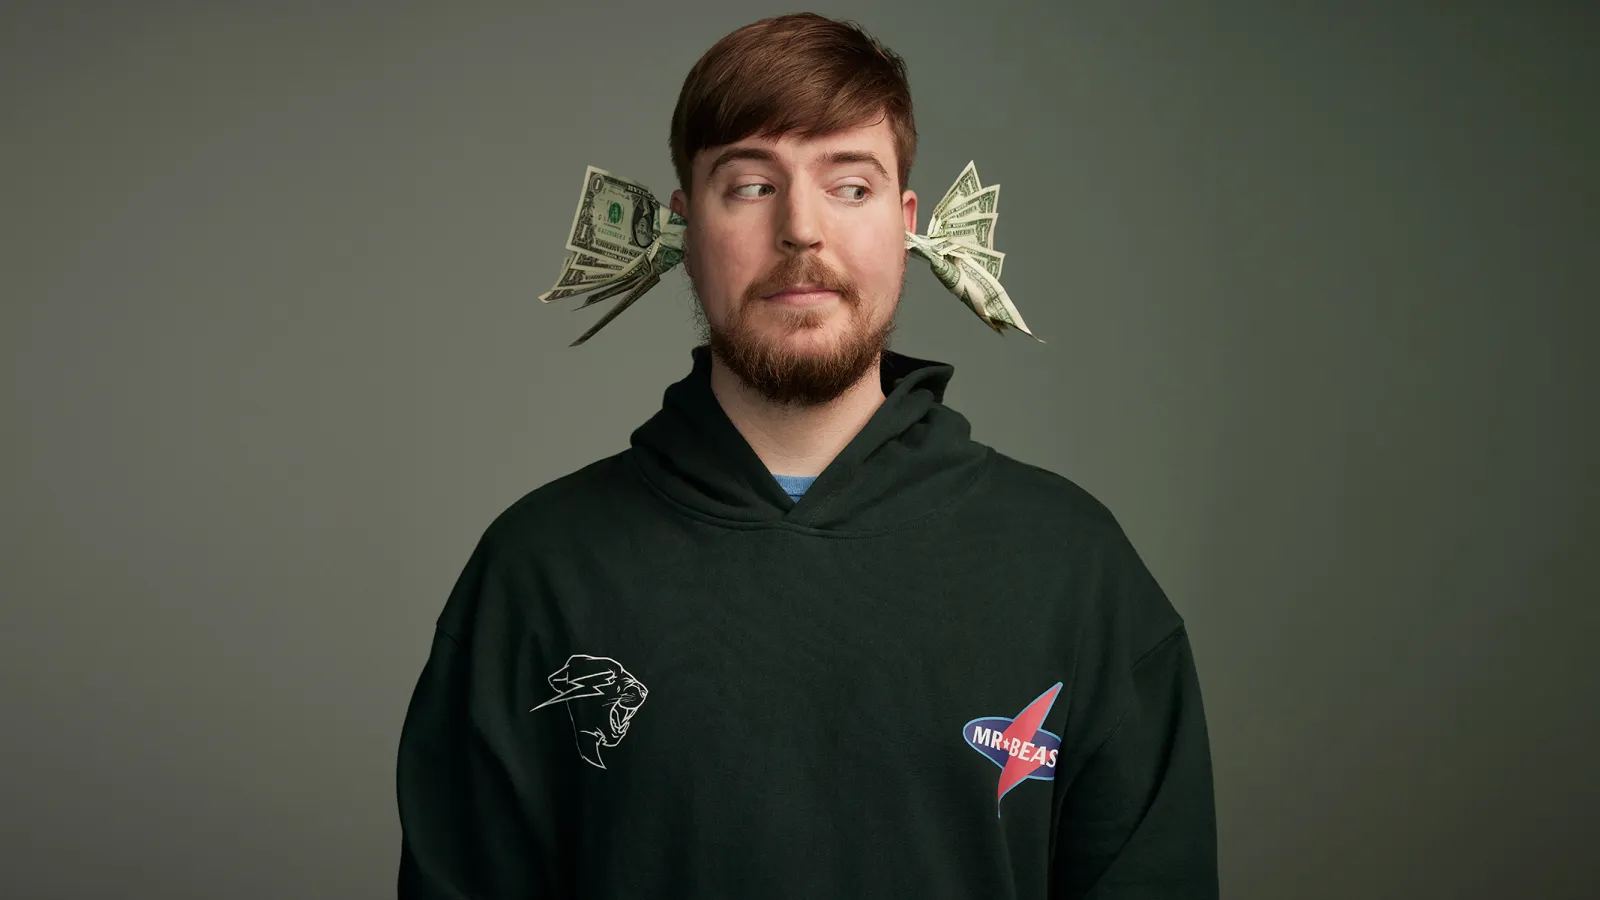 Verizon's Sponsorship on MrBeast's 'Buried Alive' Video Sparks Speculation: How Much Did They Really Pay?